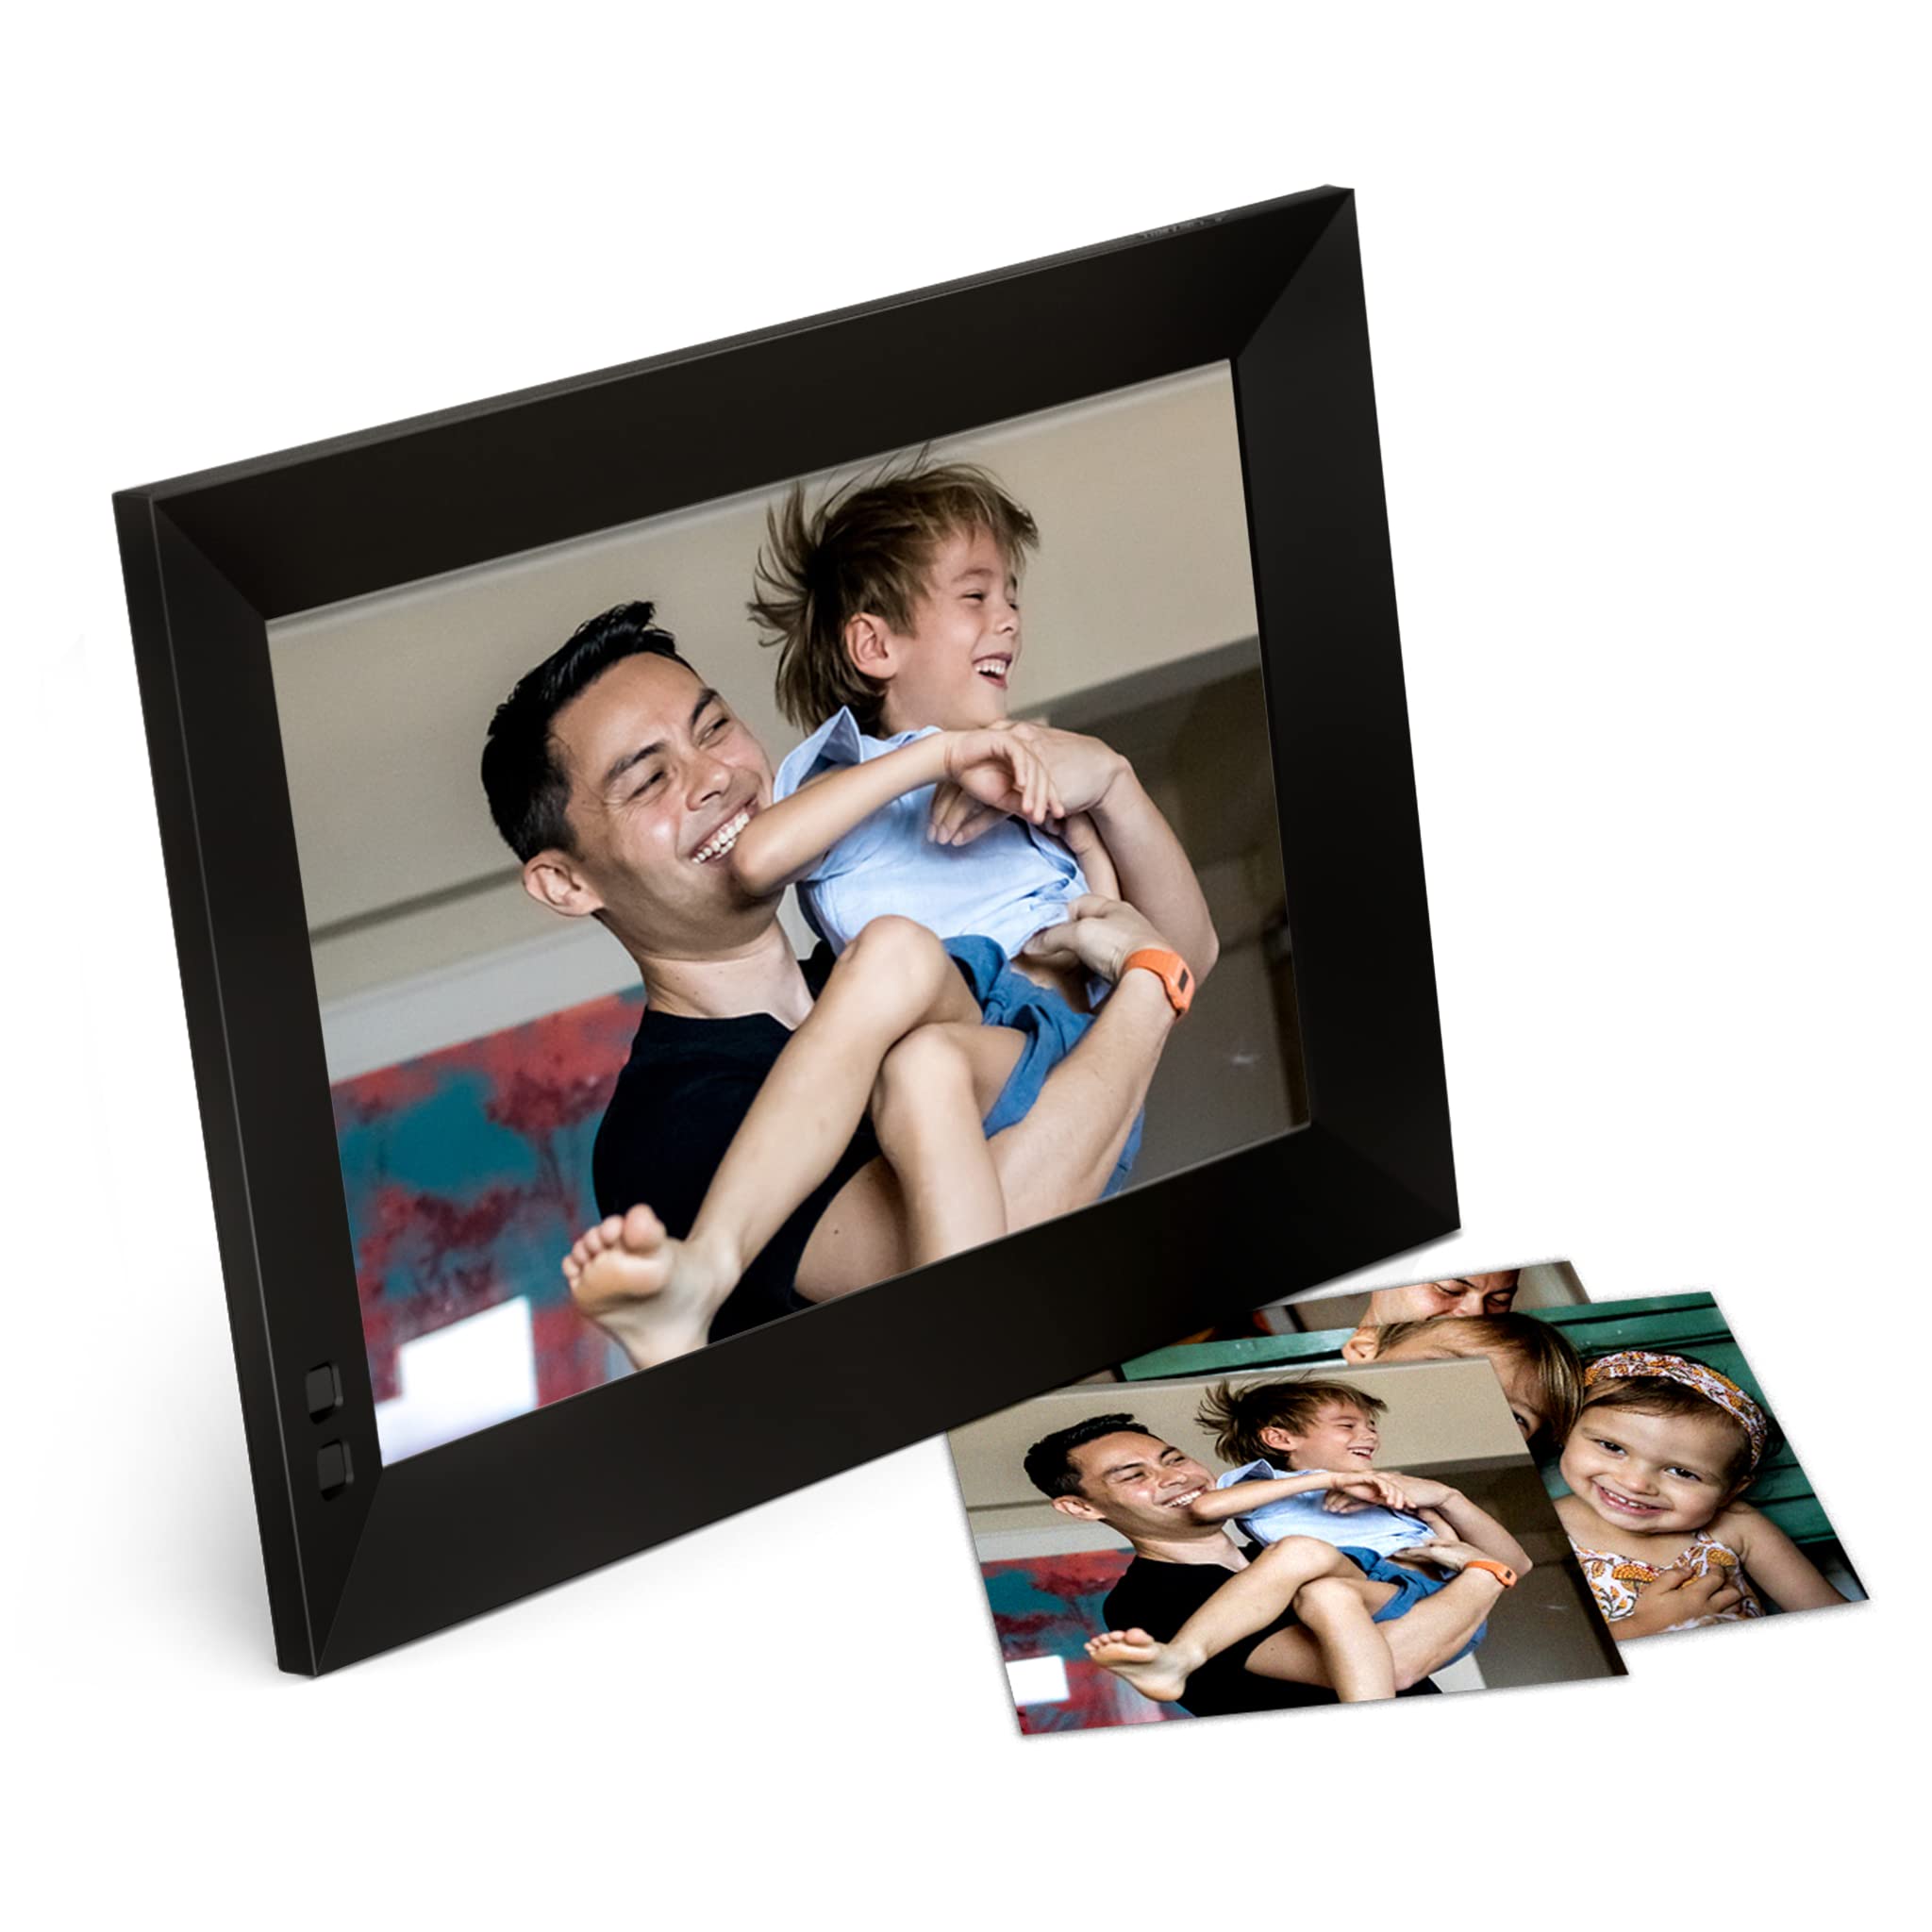 Nixplay 10.1 inch Smart Digital Photo Frame with WiFi (W10F) - Black - Includes 1 year of Nixplay Plus for Exclusive Print Discounts, Family-Sized Storage